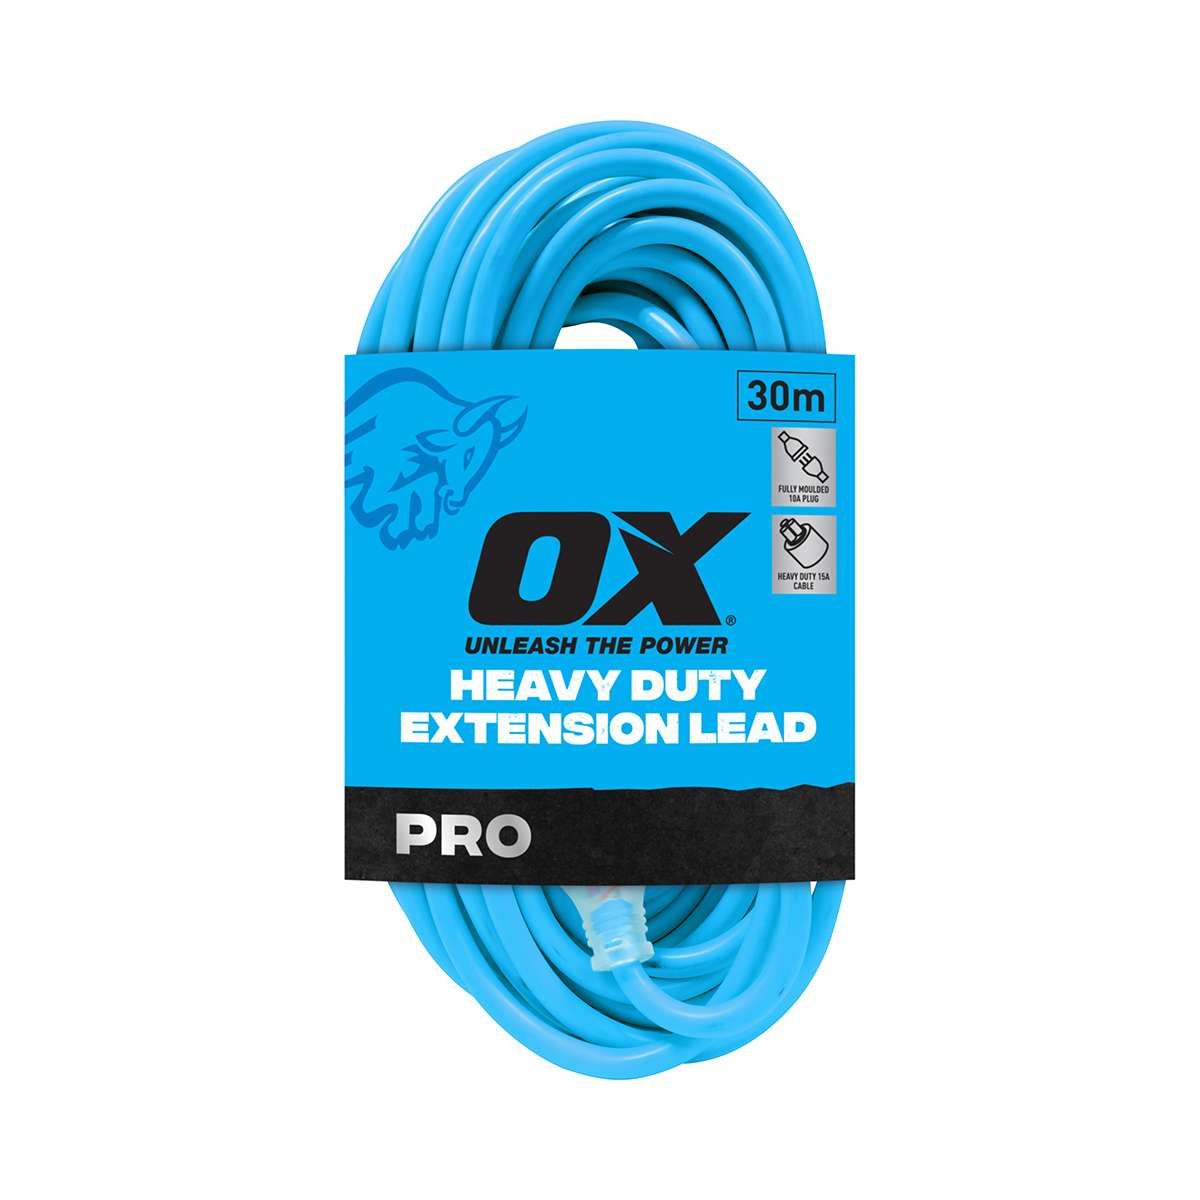 15Amp Lead & 10Amp Plug 30m Heavy Duty Extension Lead OX-P311730 by Ox